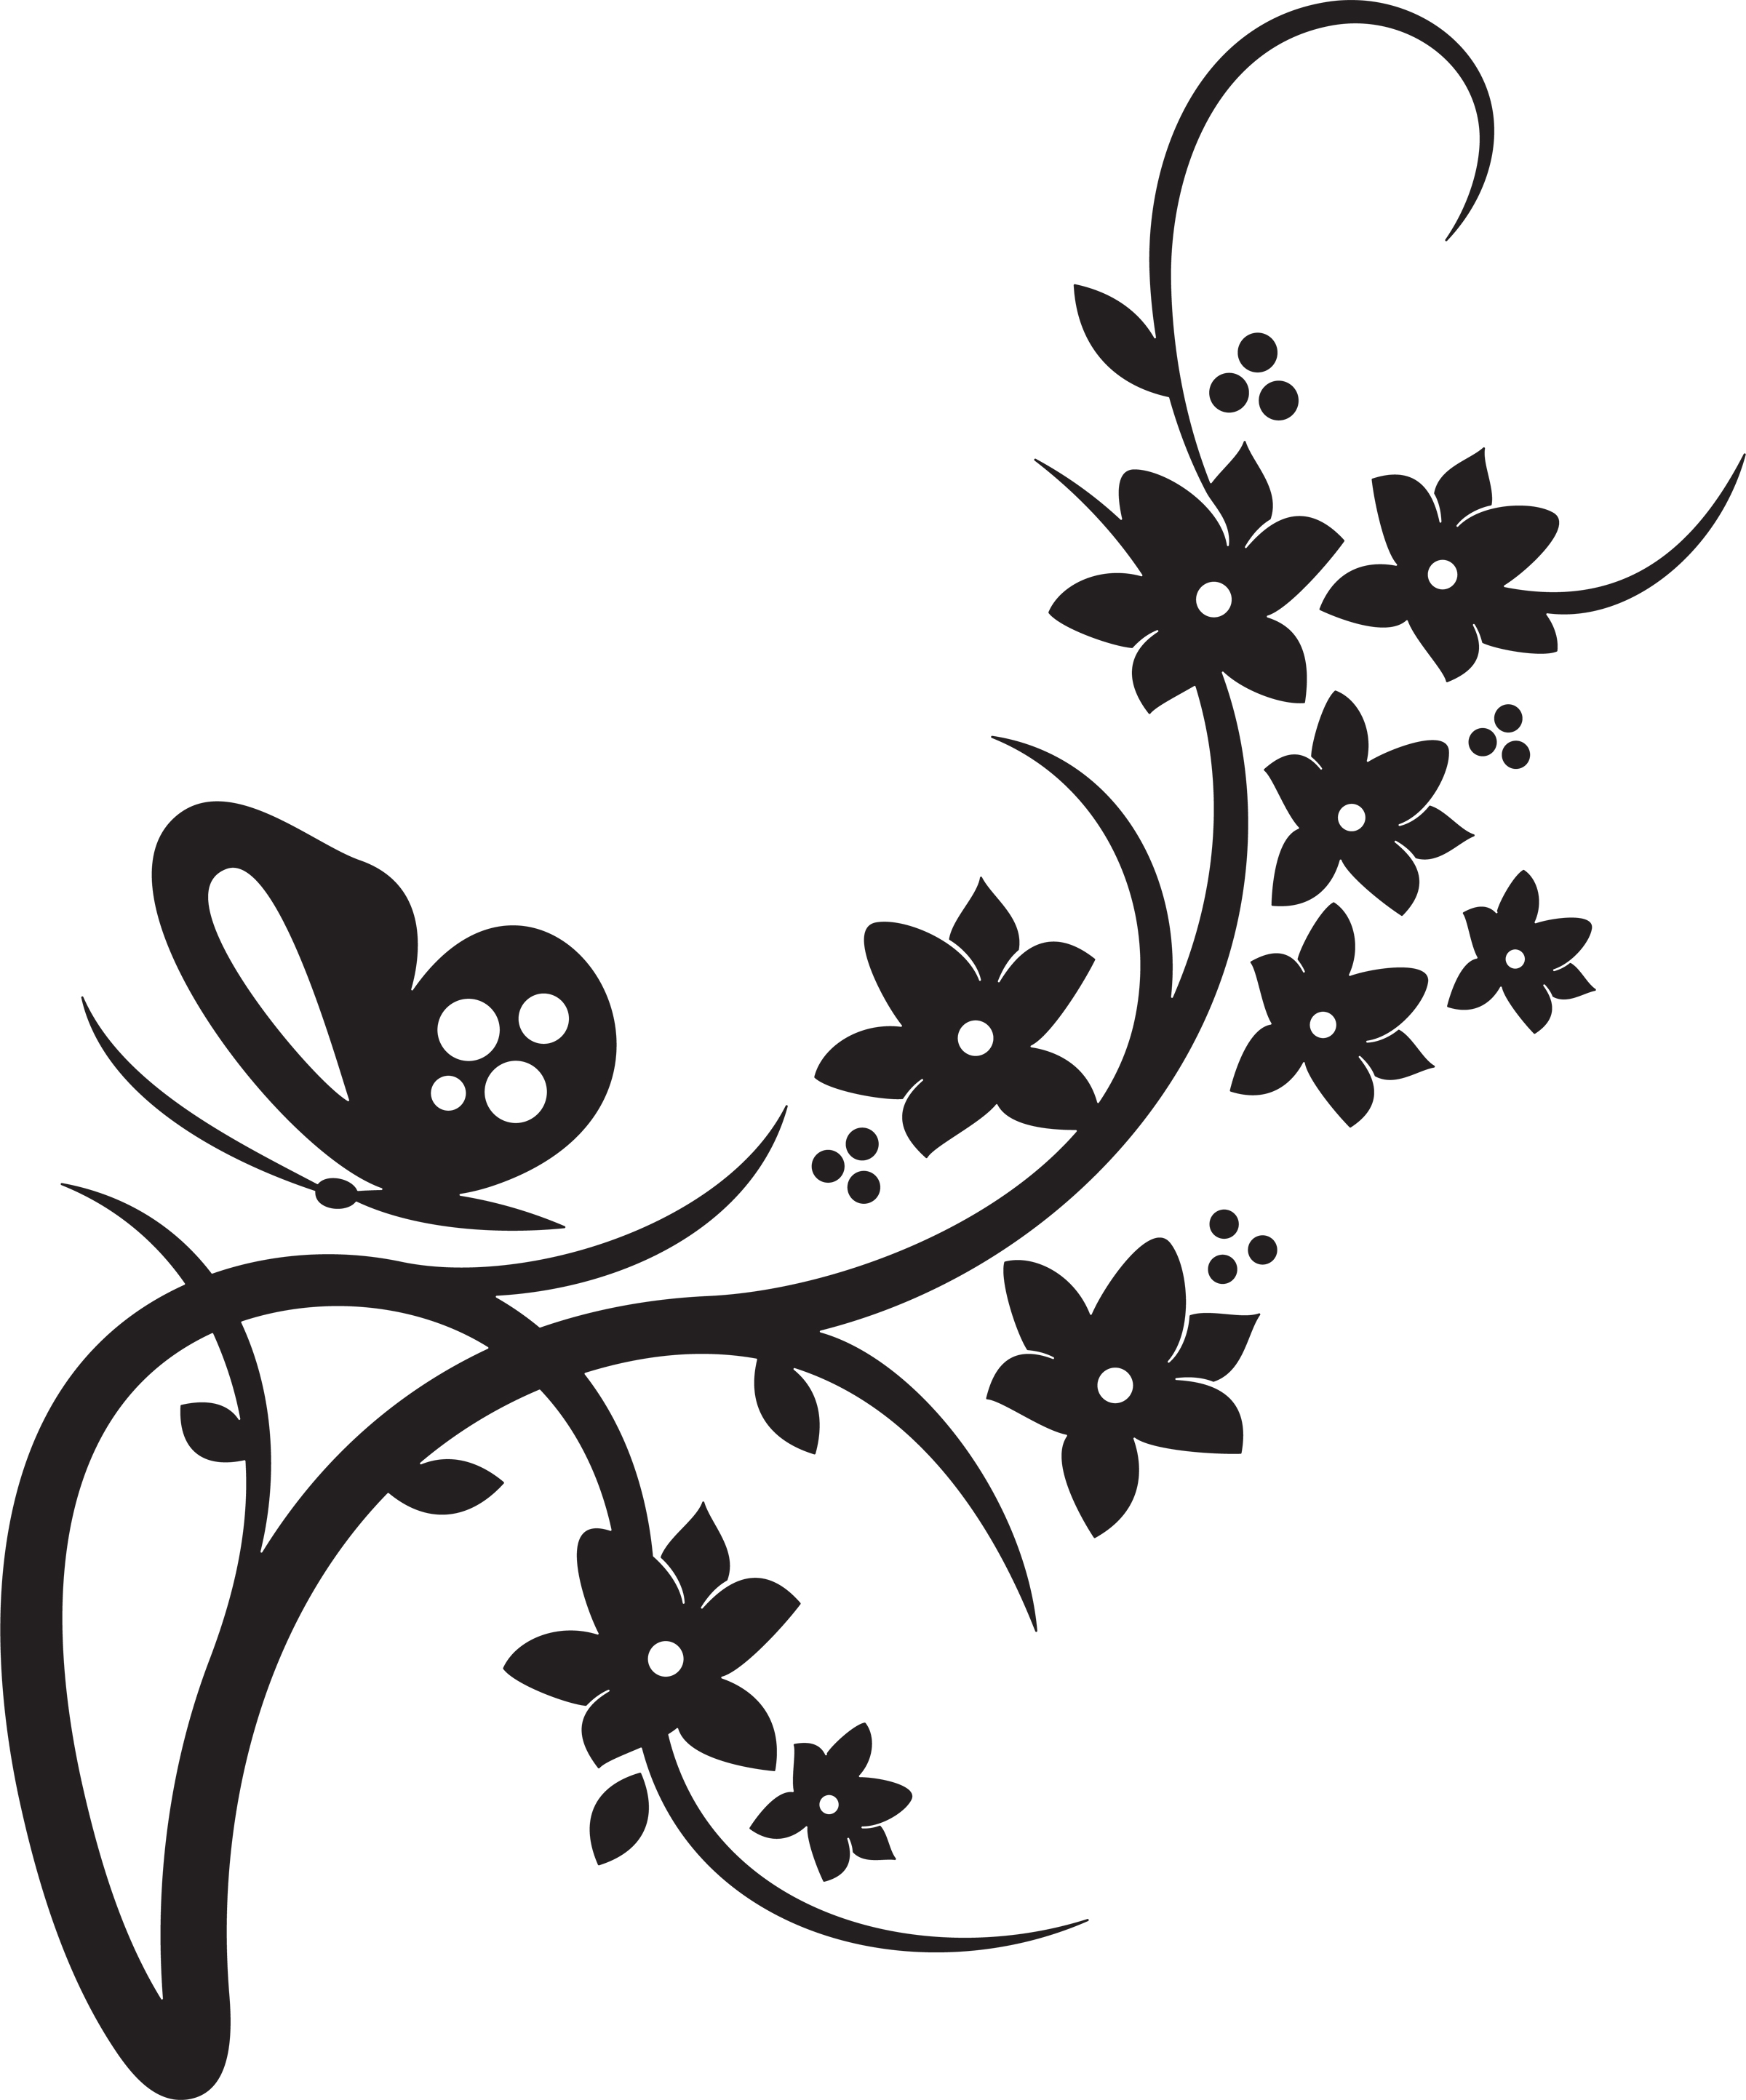 Wedding clipart butterfly custom clip art maybe a great